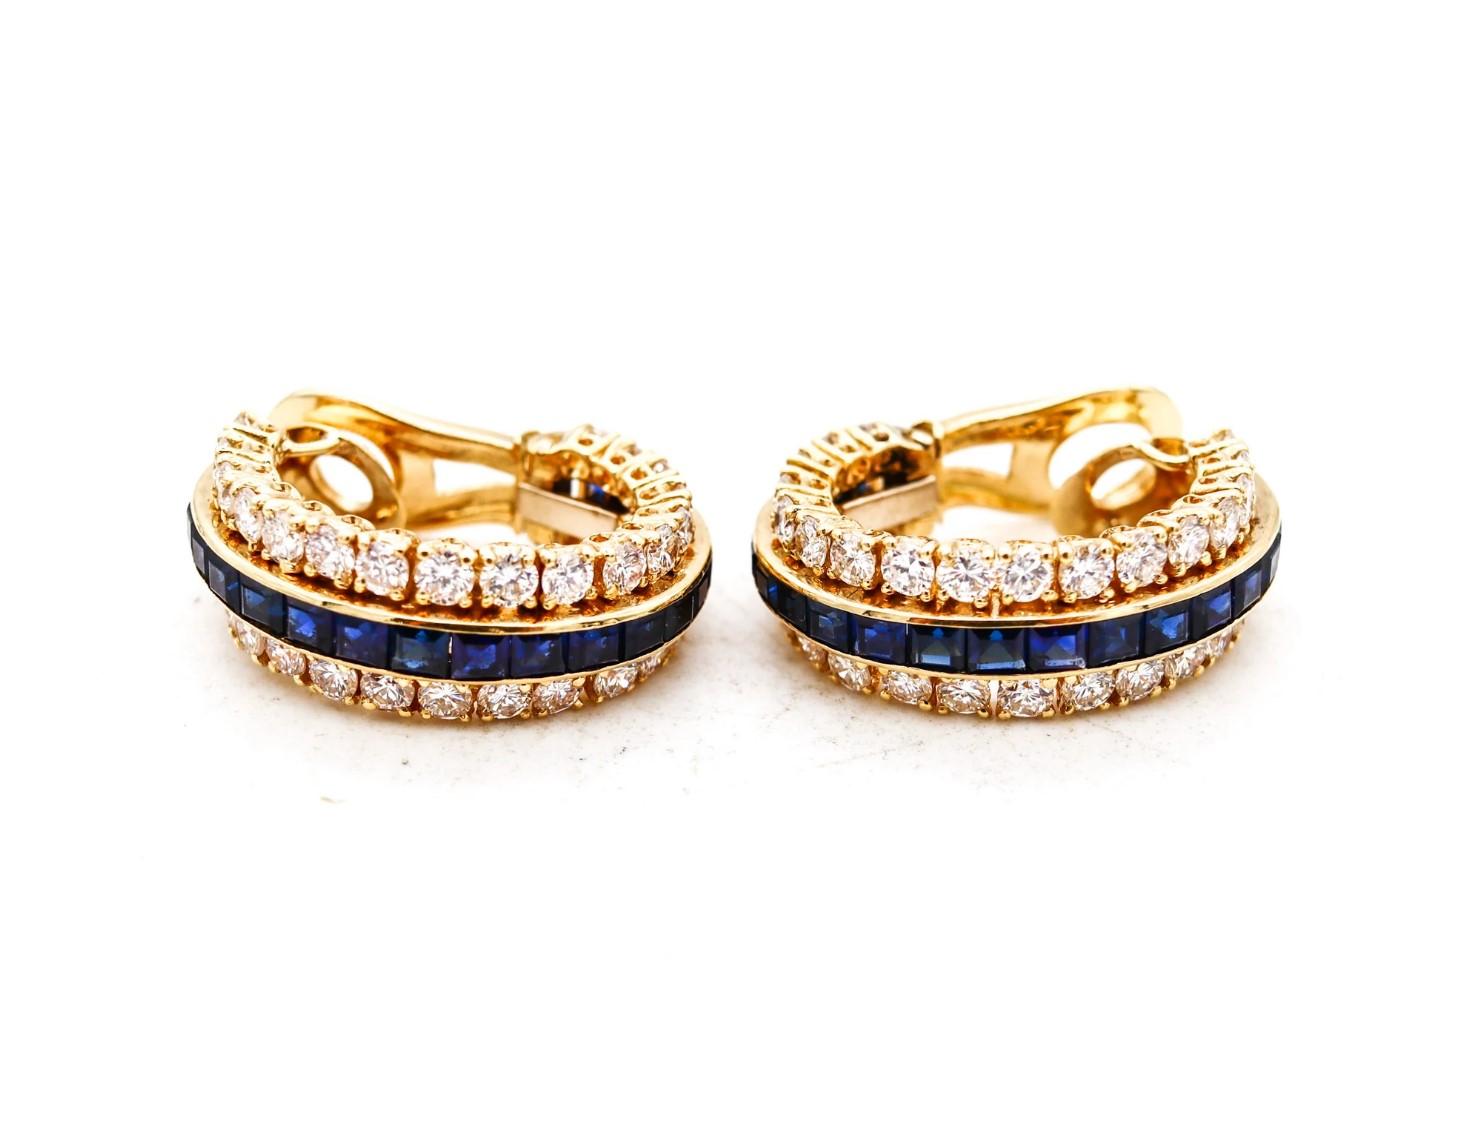 Pair of a gem set clips-earrings designed by Van Cleef & Arpels.

Gorgeous pieces, created in France, by the iconic Parisian jewelry house of Van Cleef & Arpels. This pair of clips-earrings was crafted in solid yellow gold of 18 karats, with French